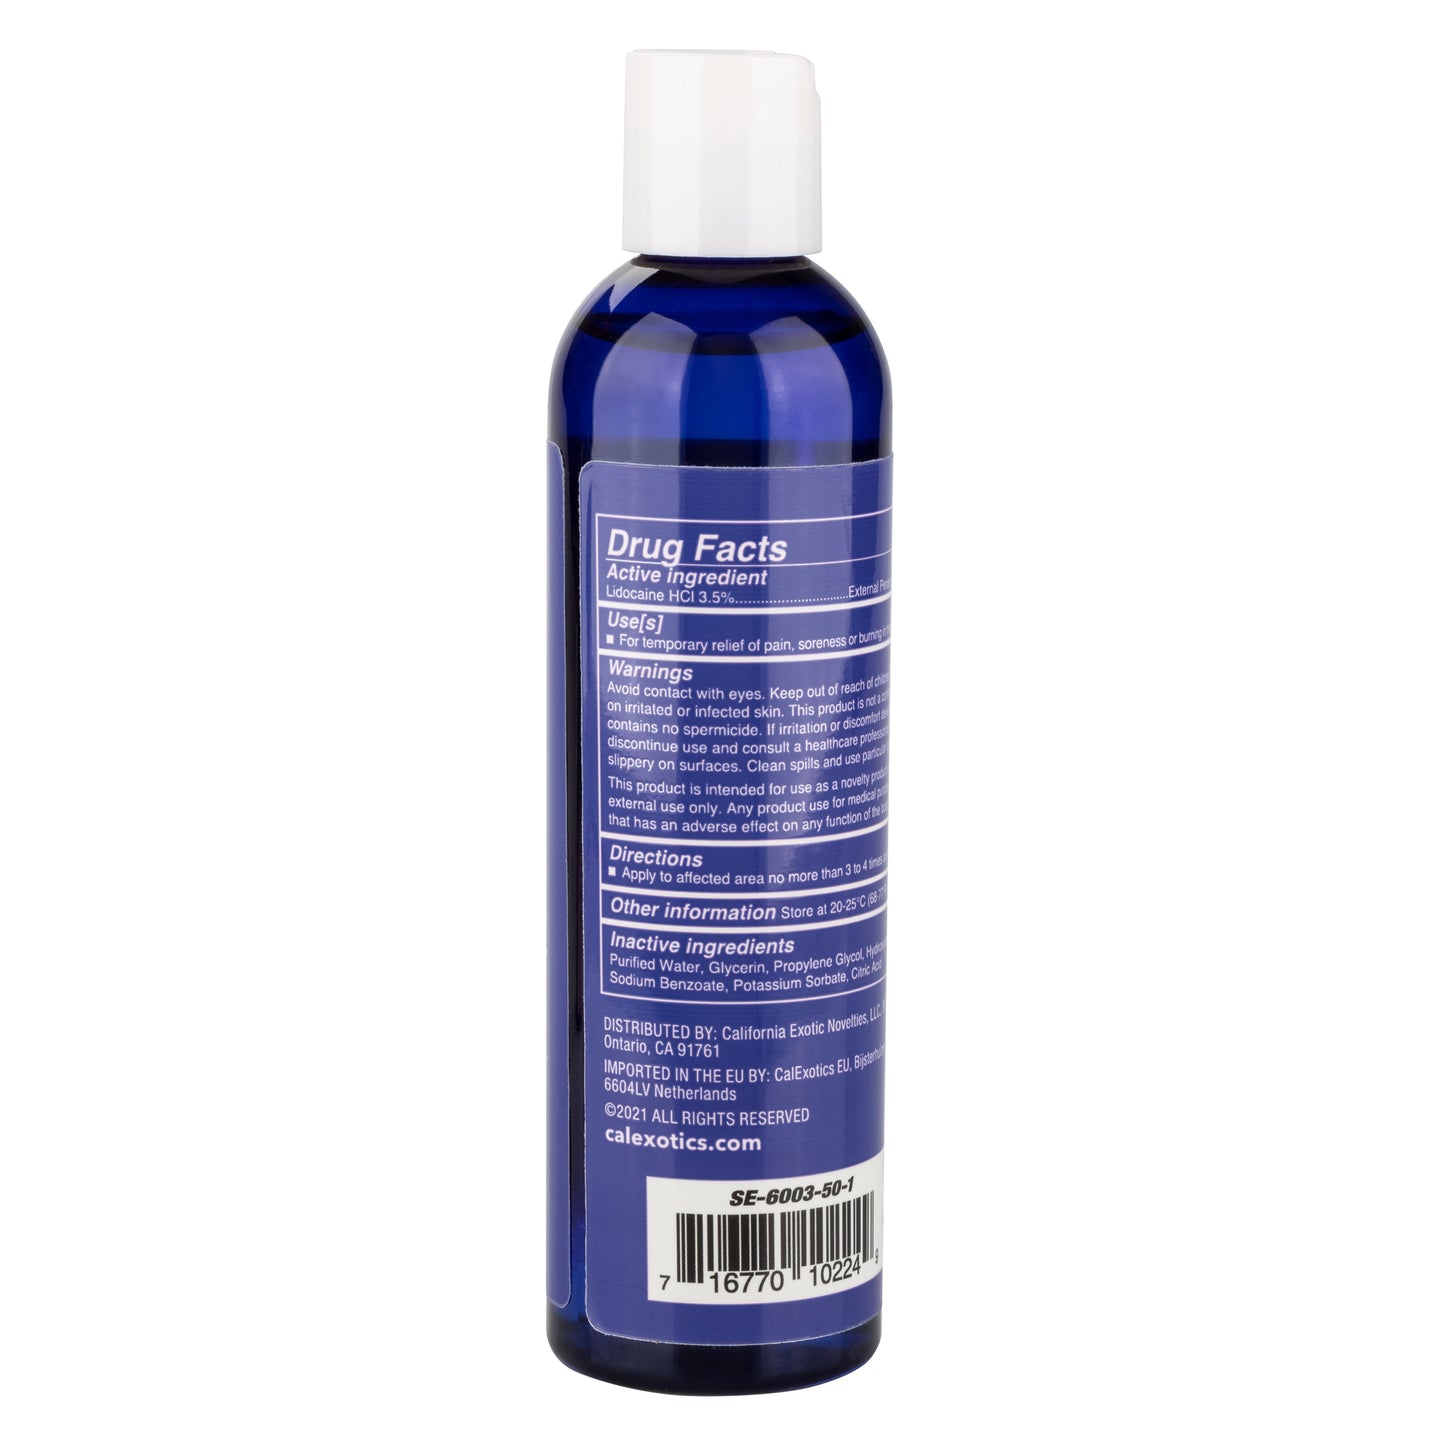 Admiral at Ease Anal Lubricant - 8 Fl. Oz.